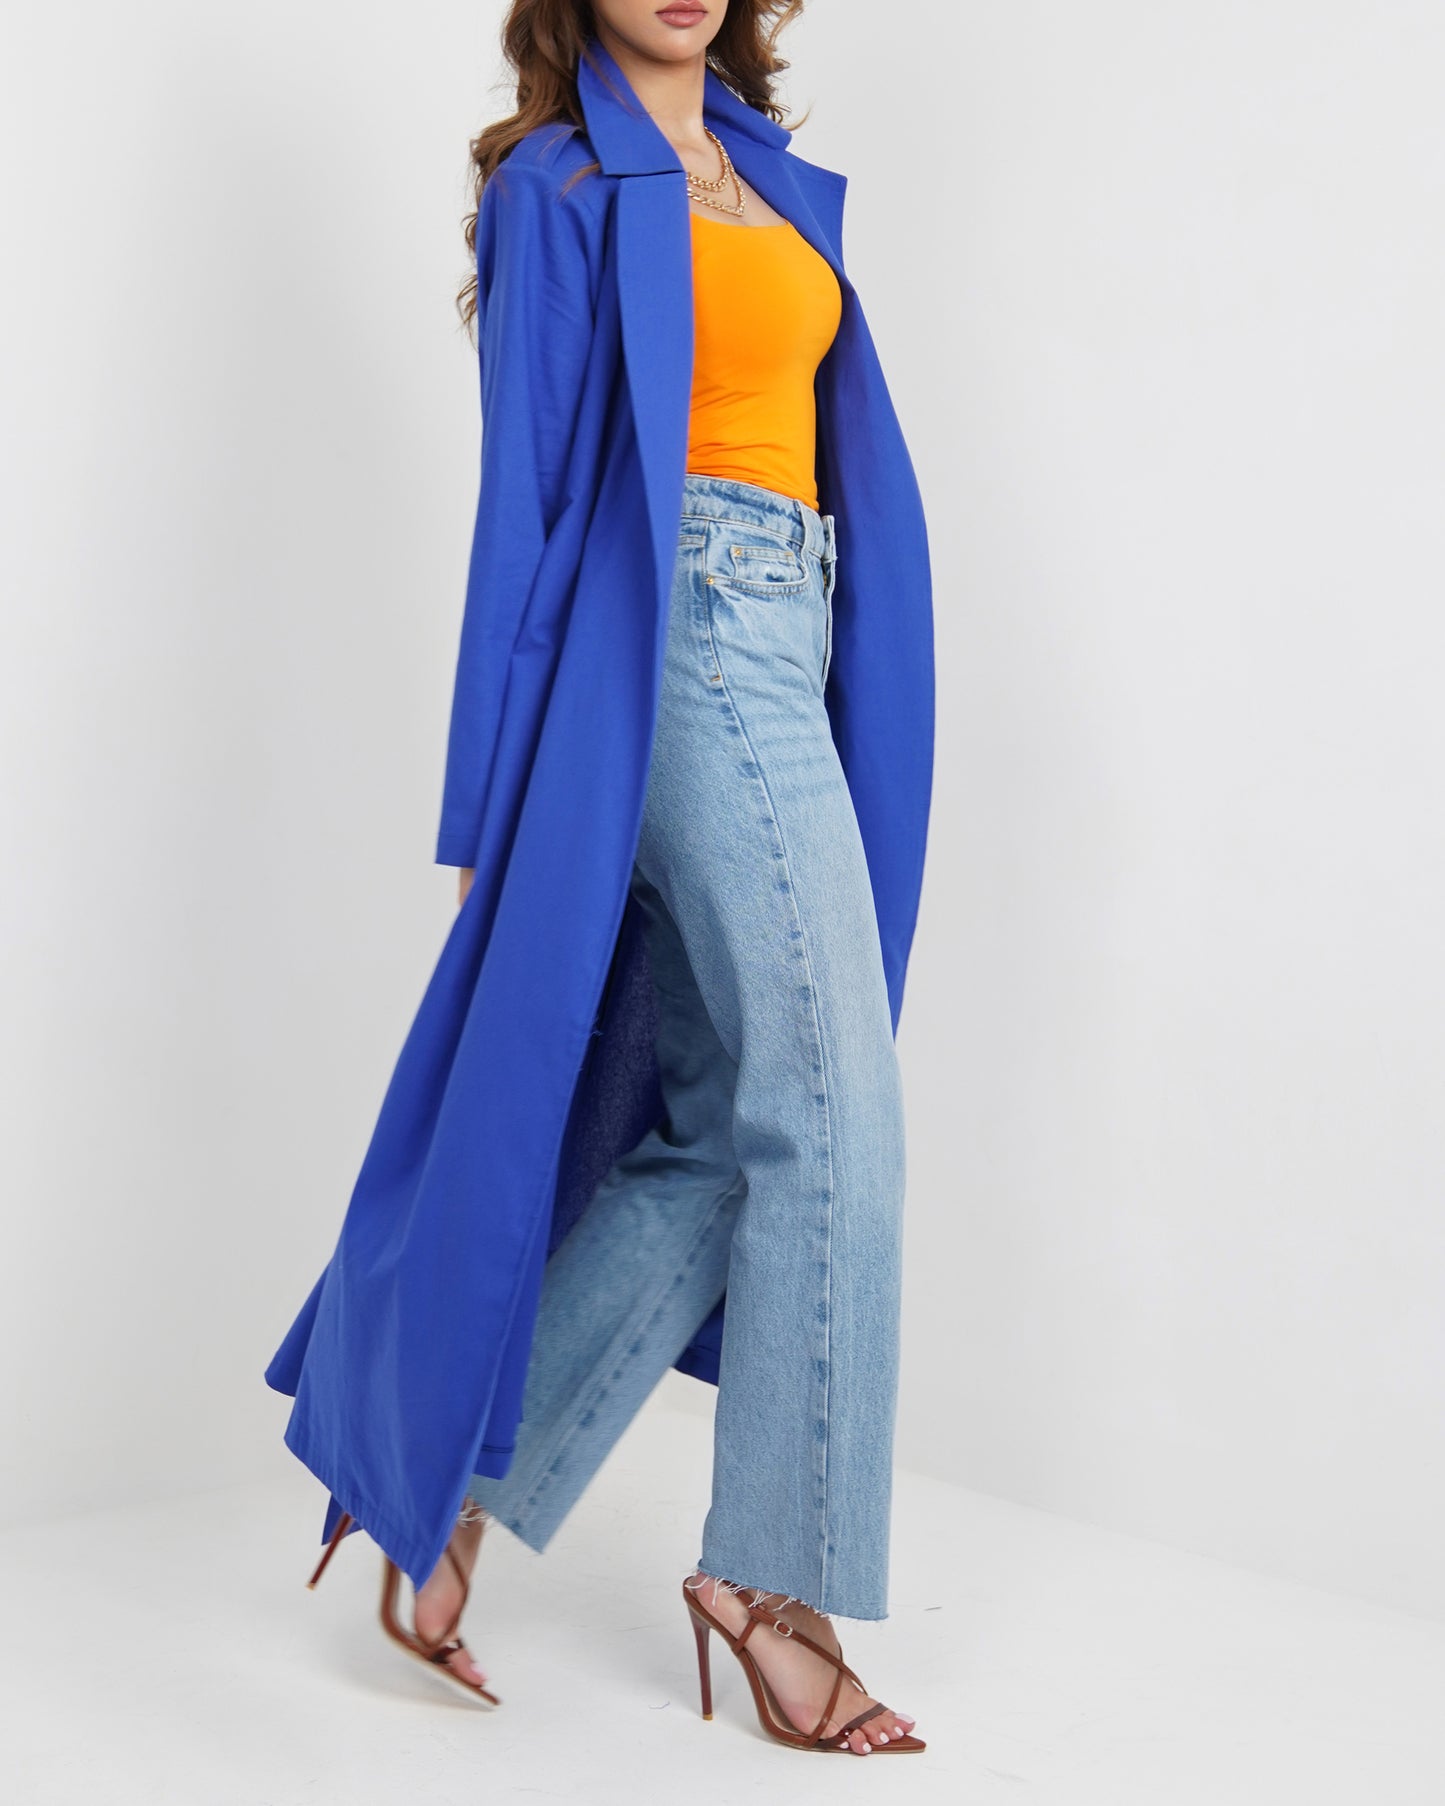 Long line trench coat in royal blue